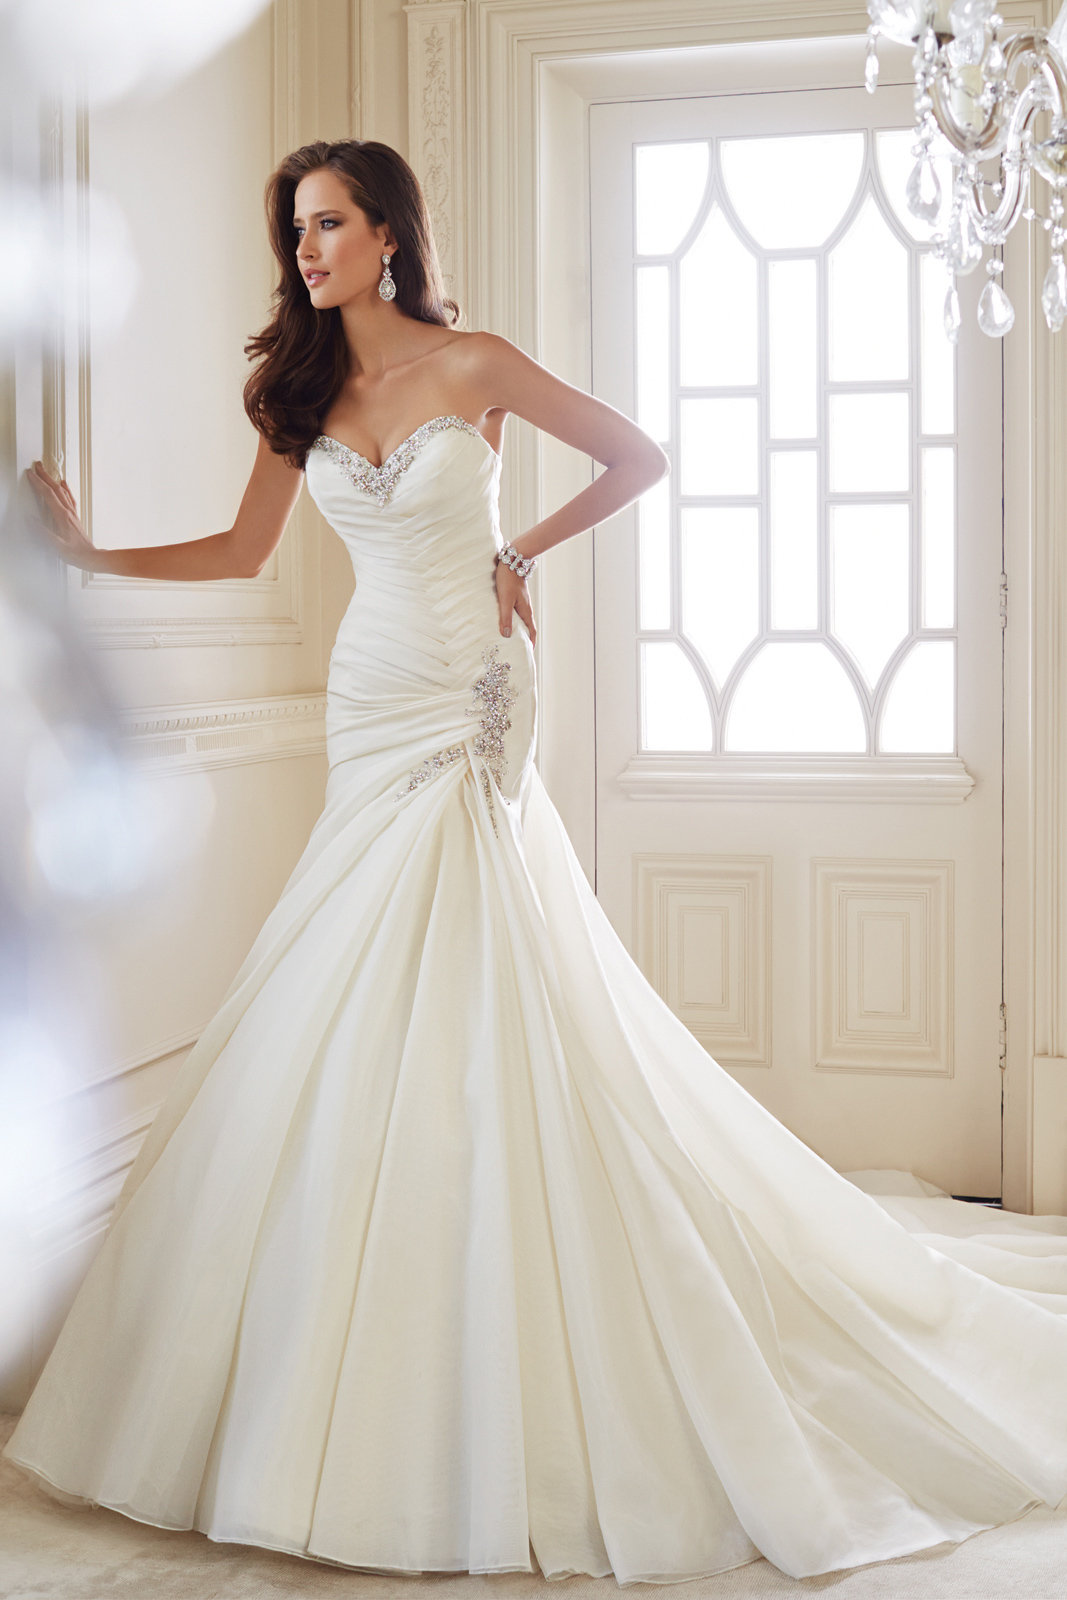 The 25 Most Popular Wedding Gowns of 2014 | BridalGuide